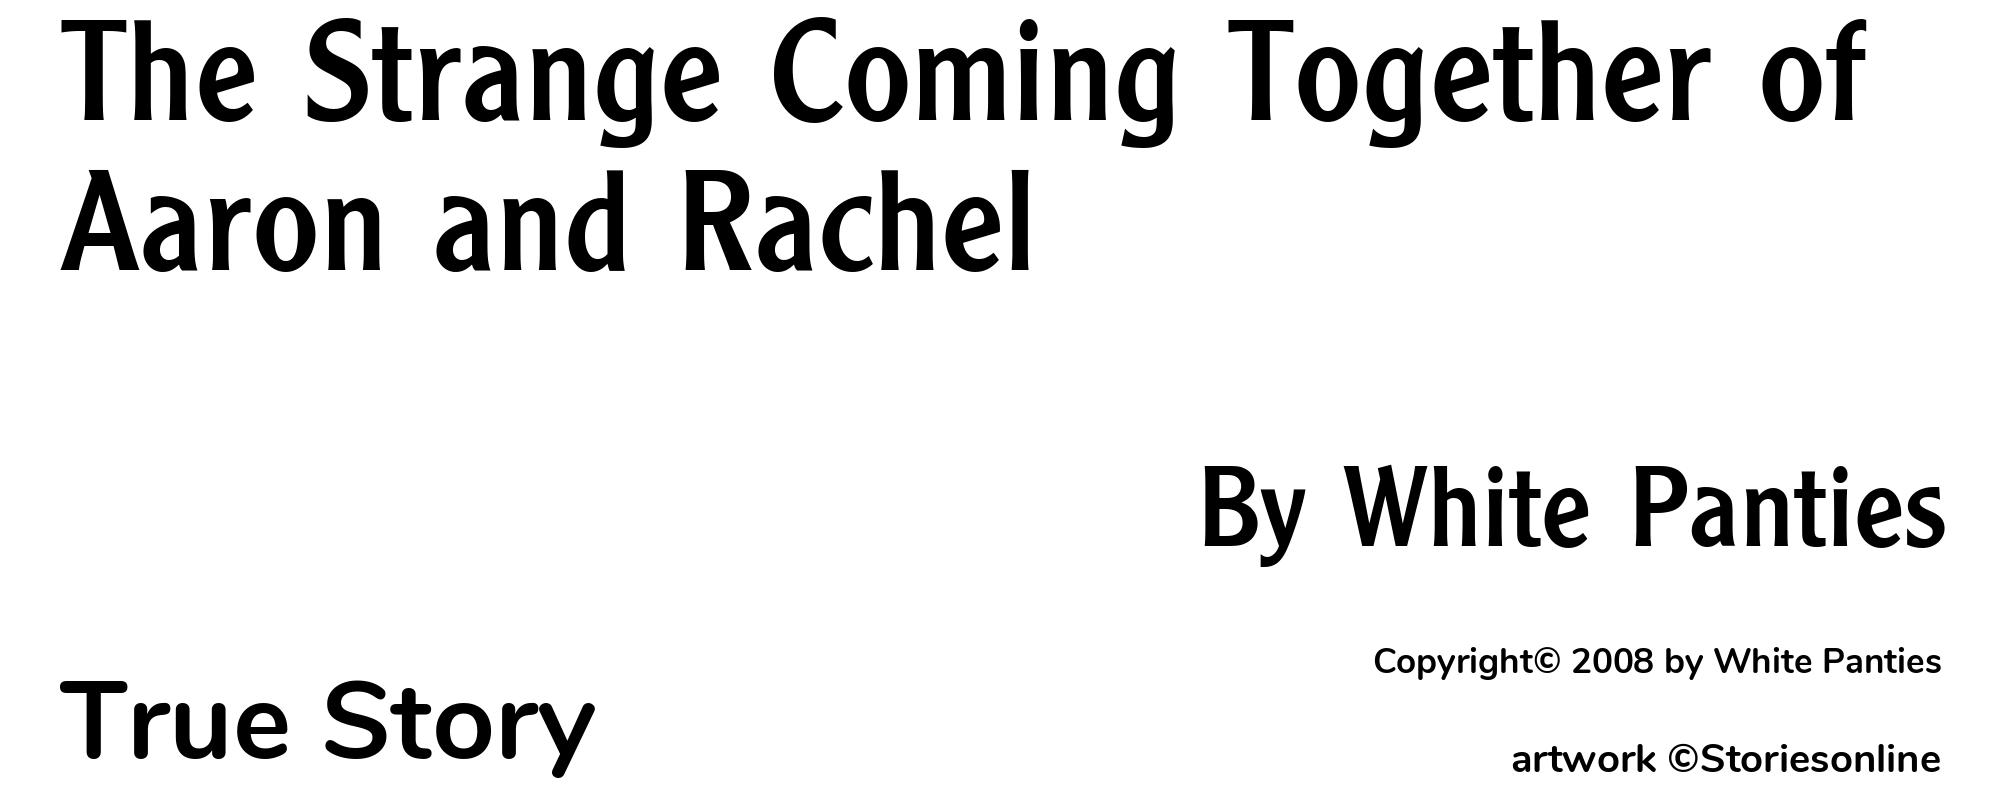 The Strange Coming Together of Aaron and Rachel - Cover